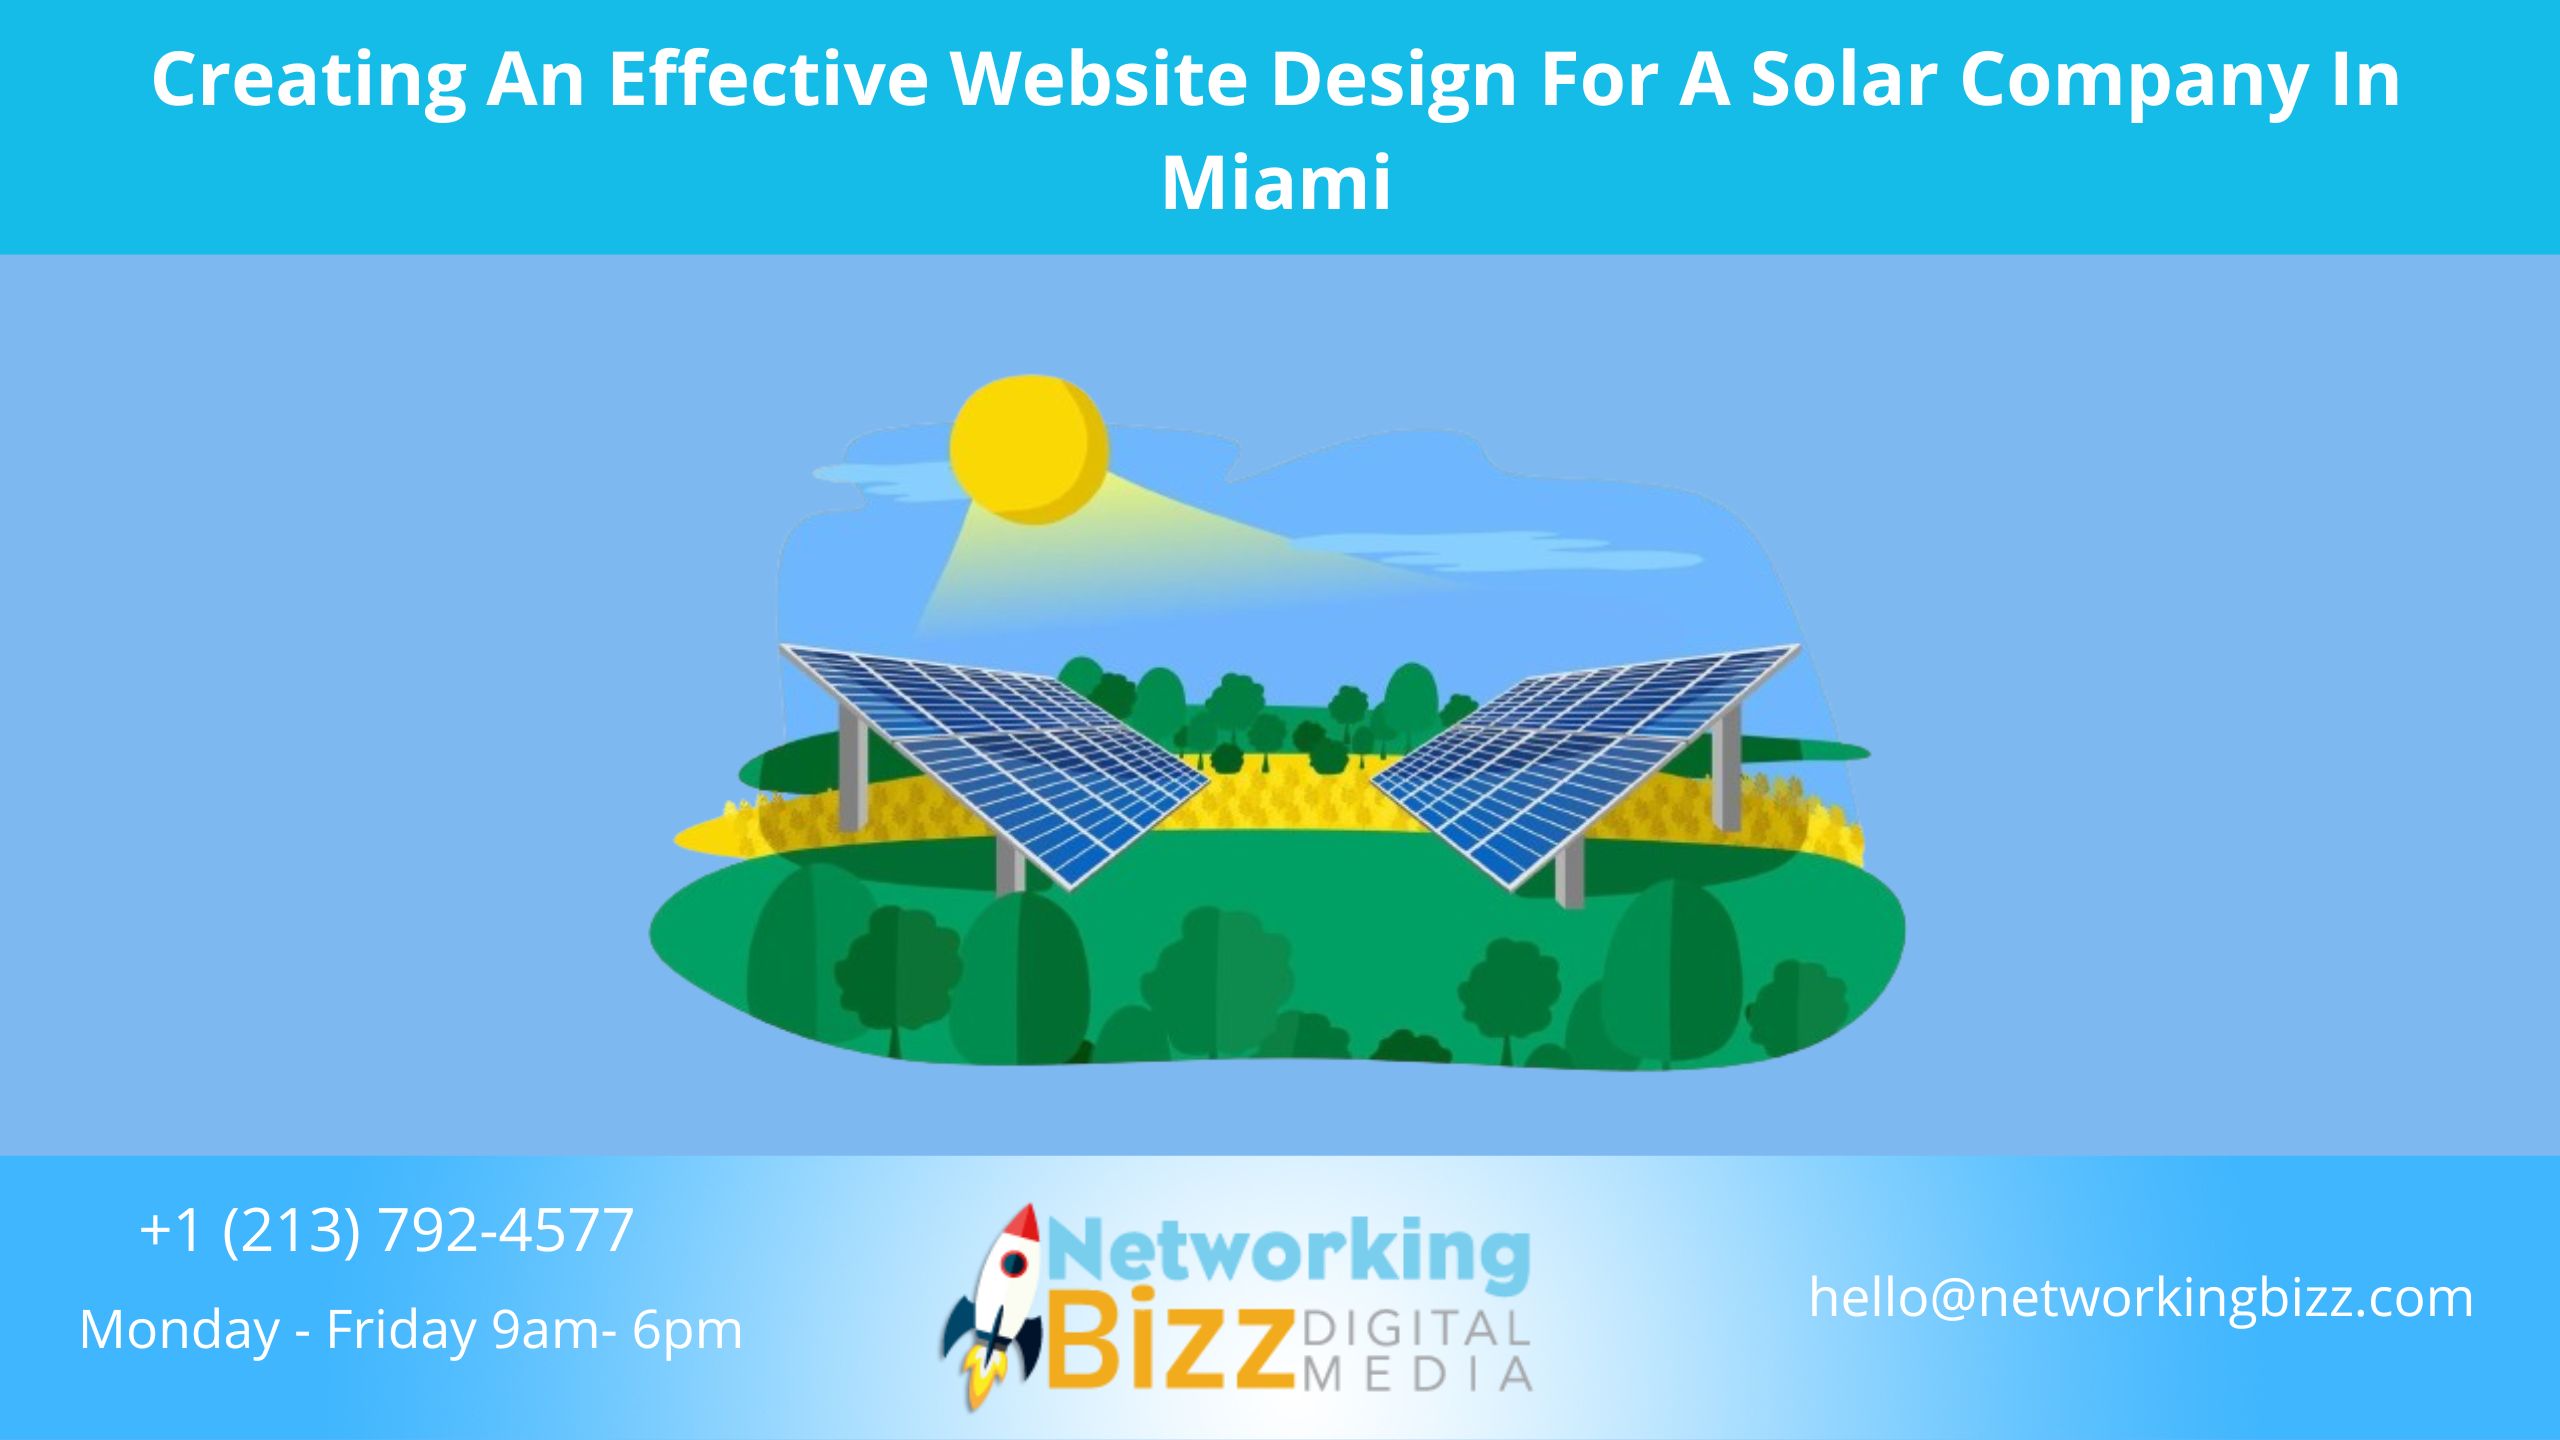 Creating An Effective Website Design For A Solar Company In Miami